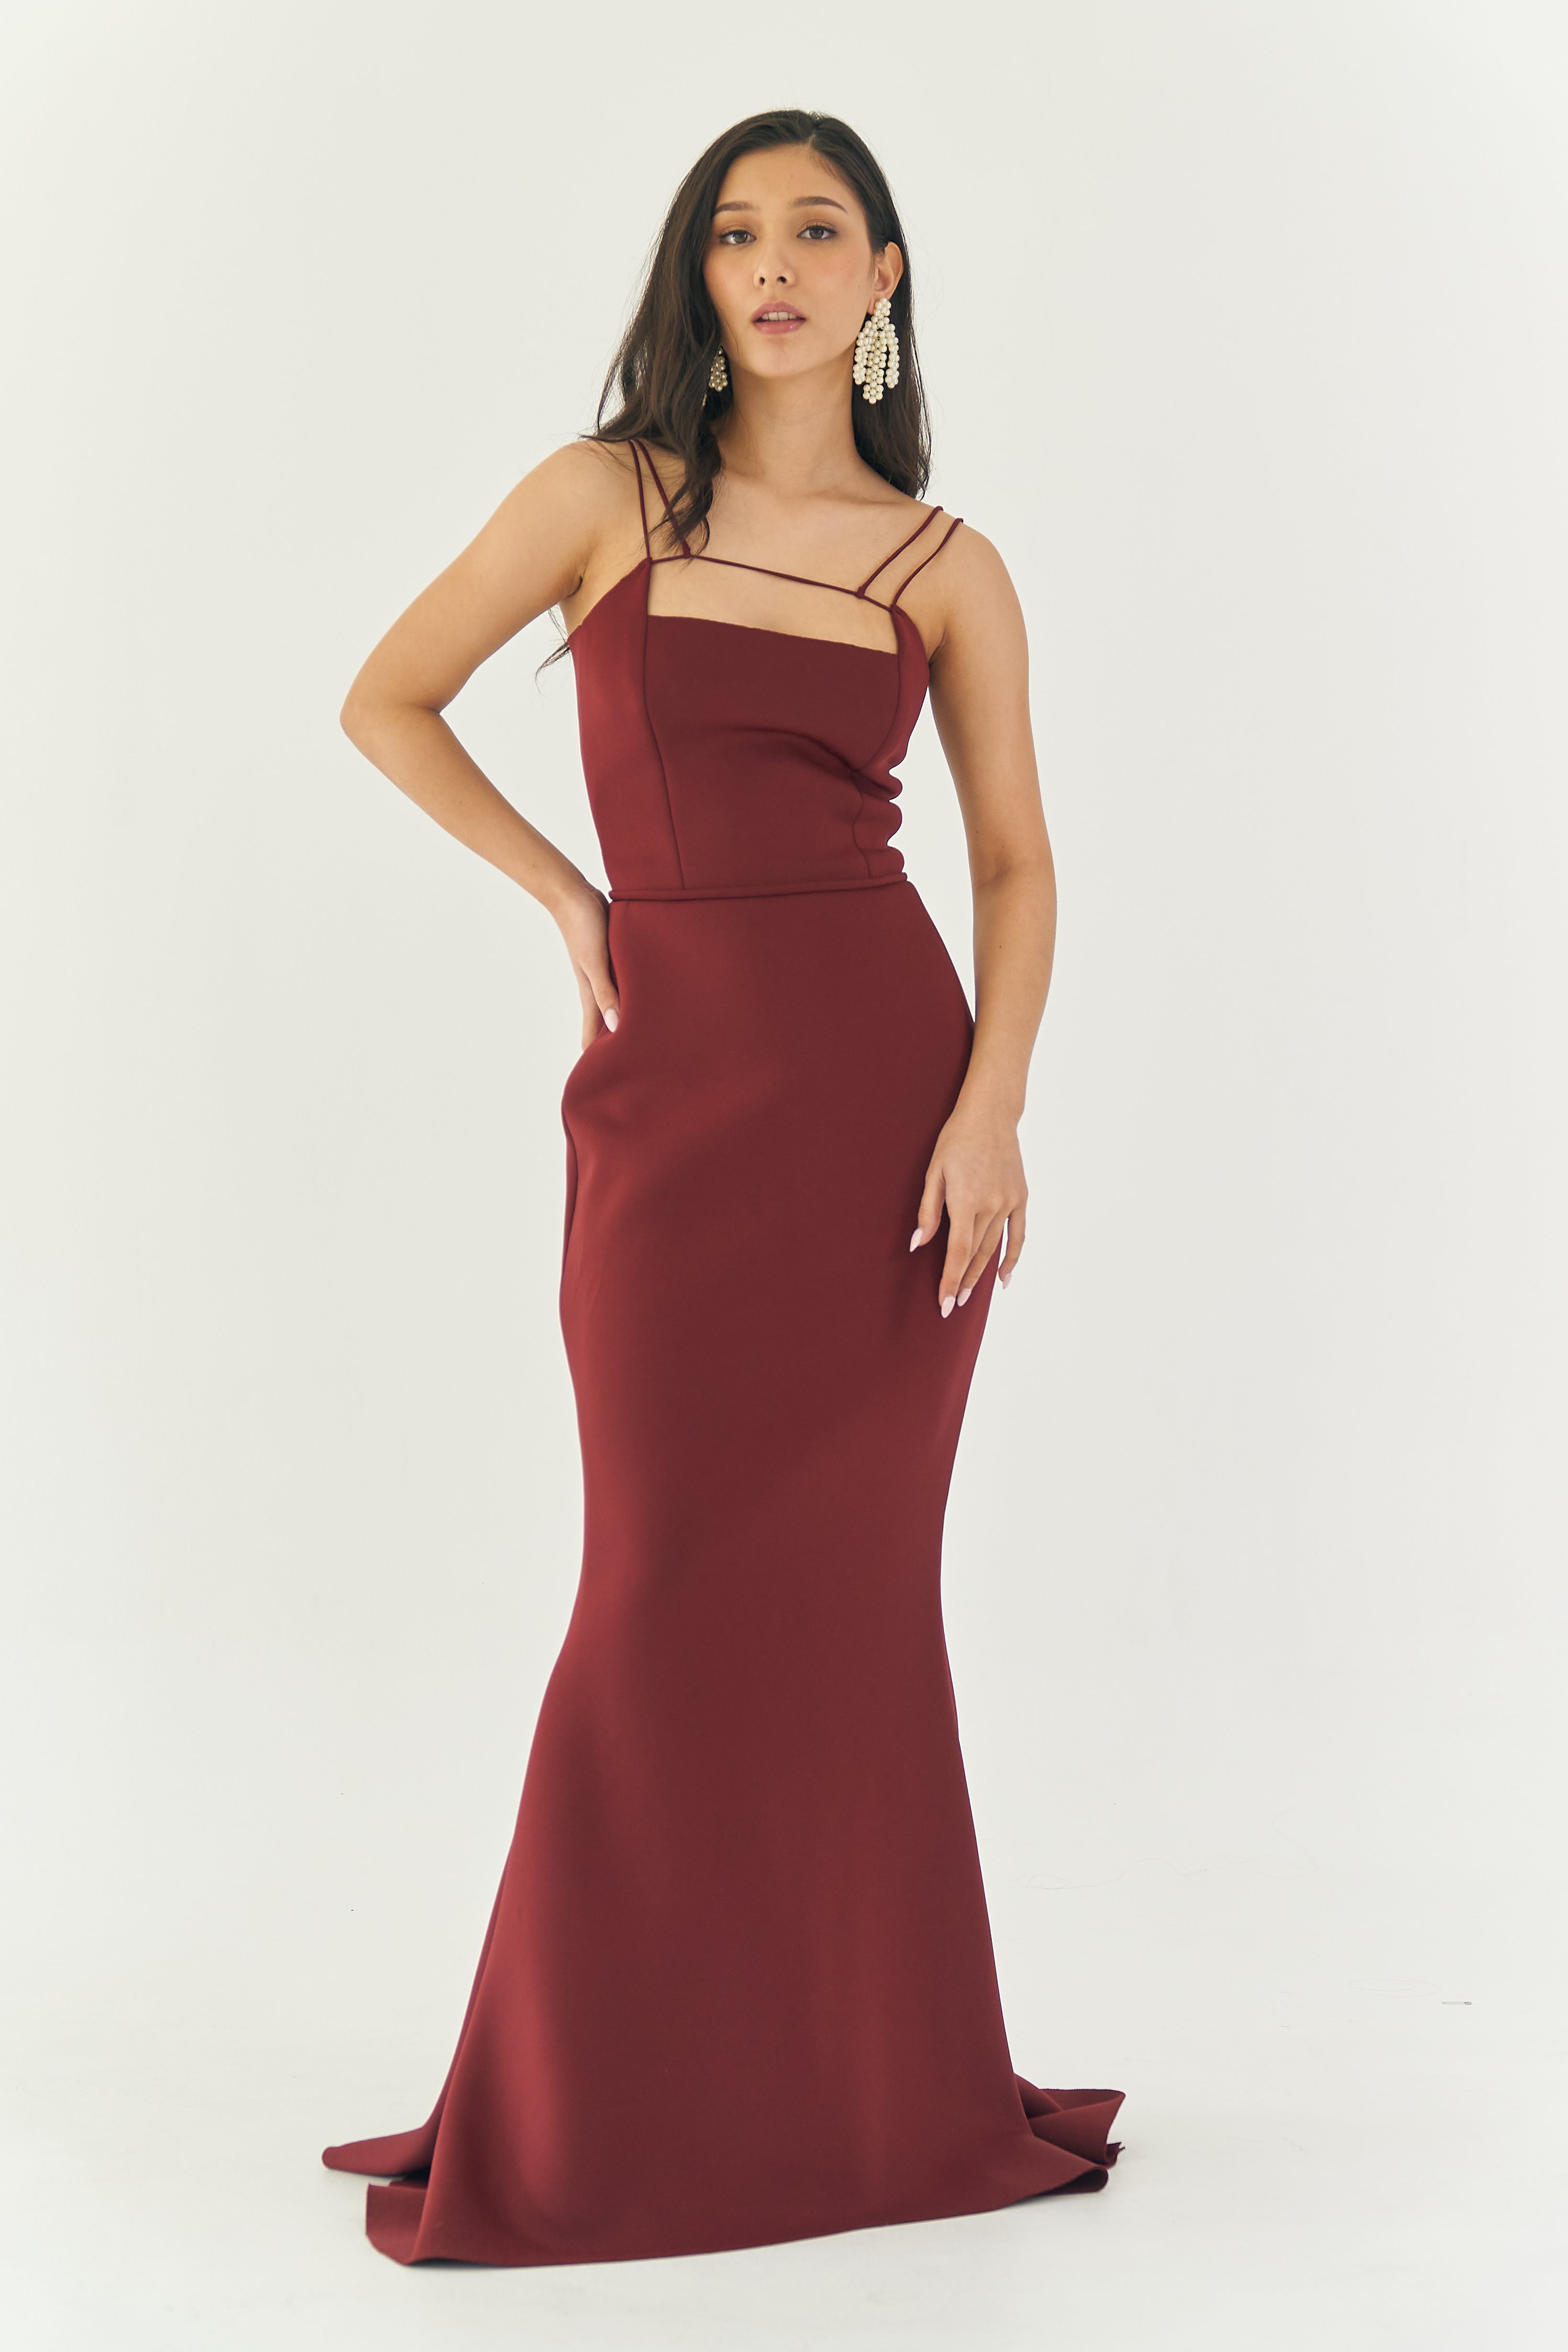 Strappy Red Neoprene Mermaid Gown